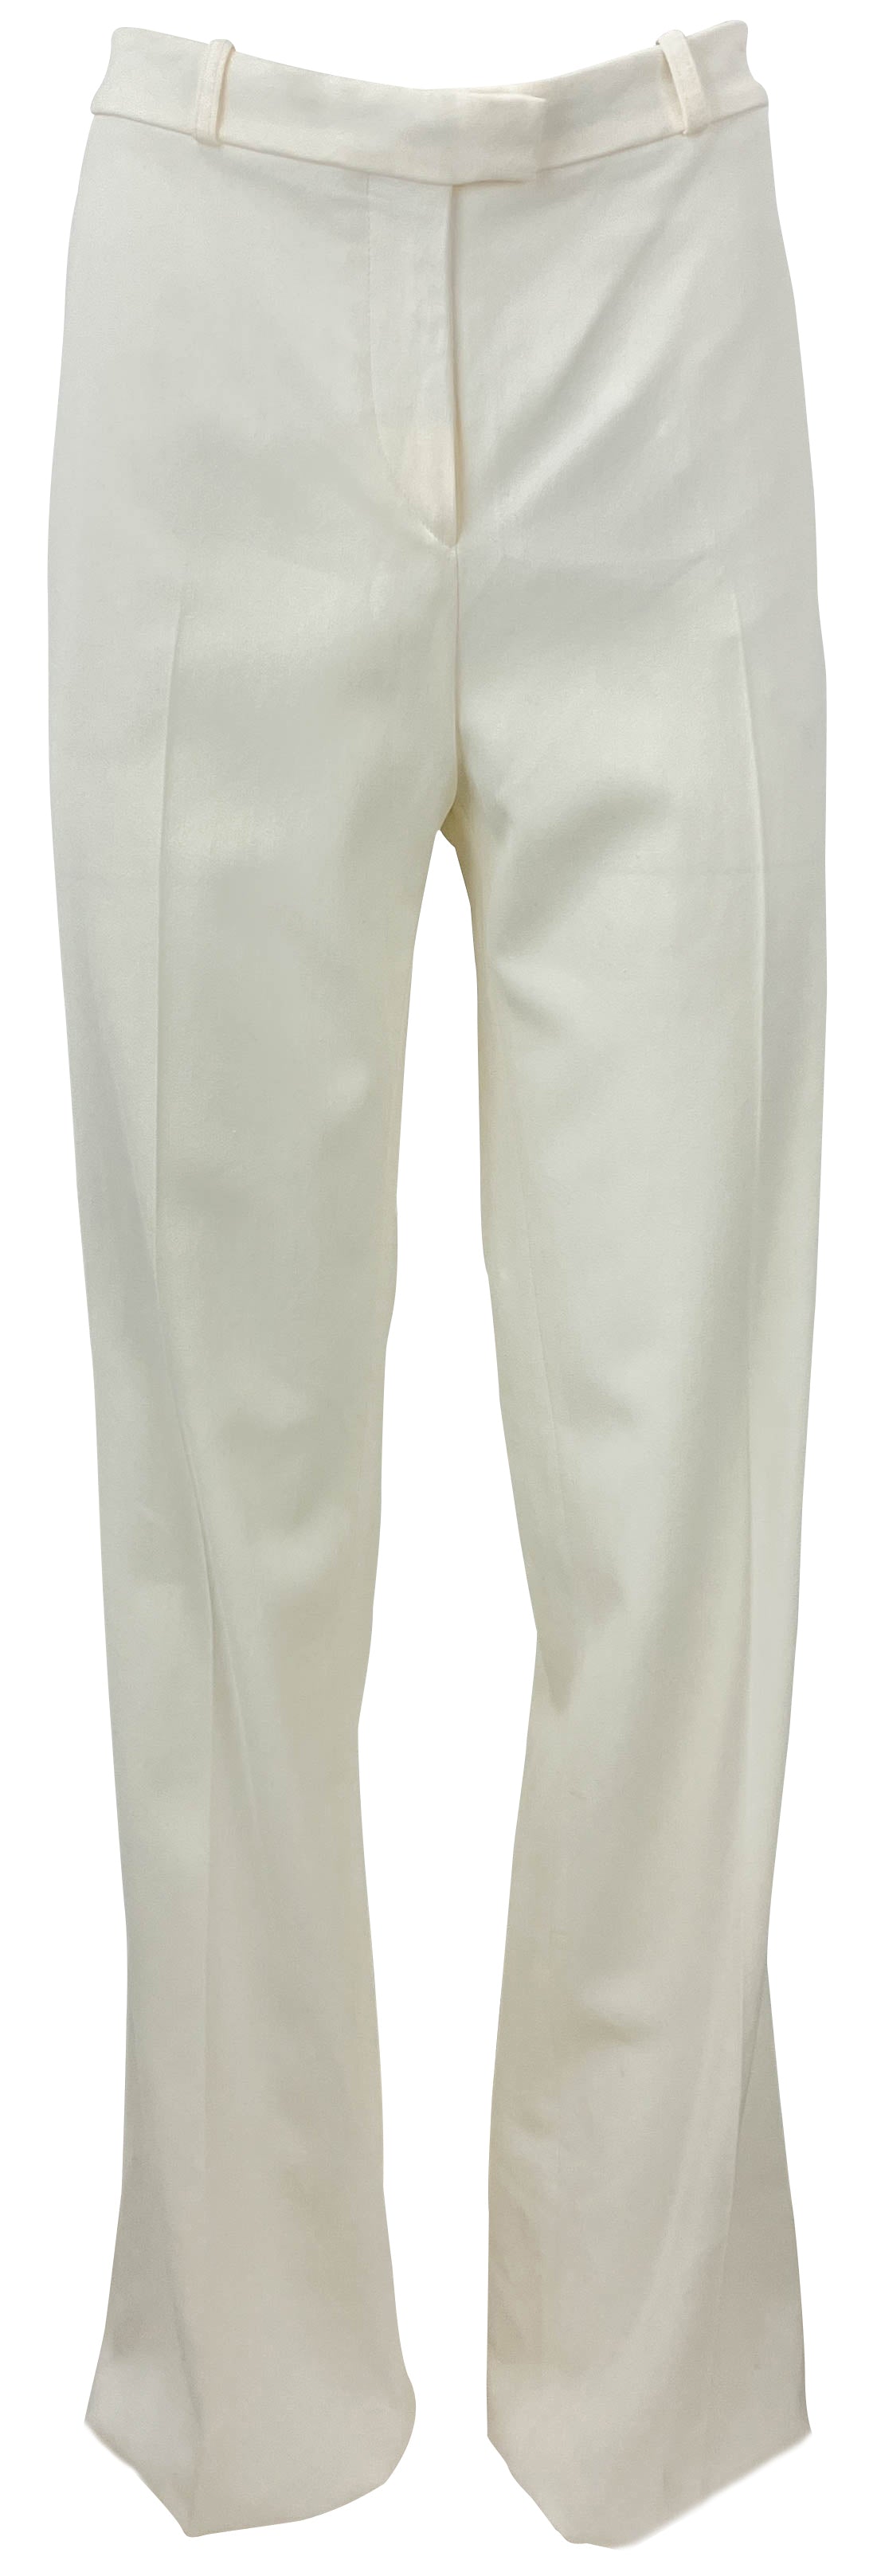 Etro Fuji Trousers in Cream - Discounts on Etro at UAL